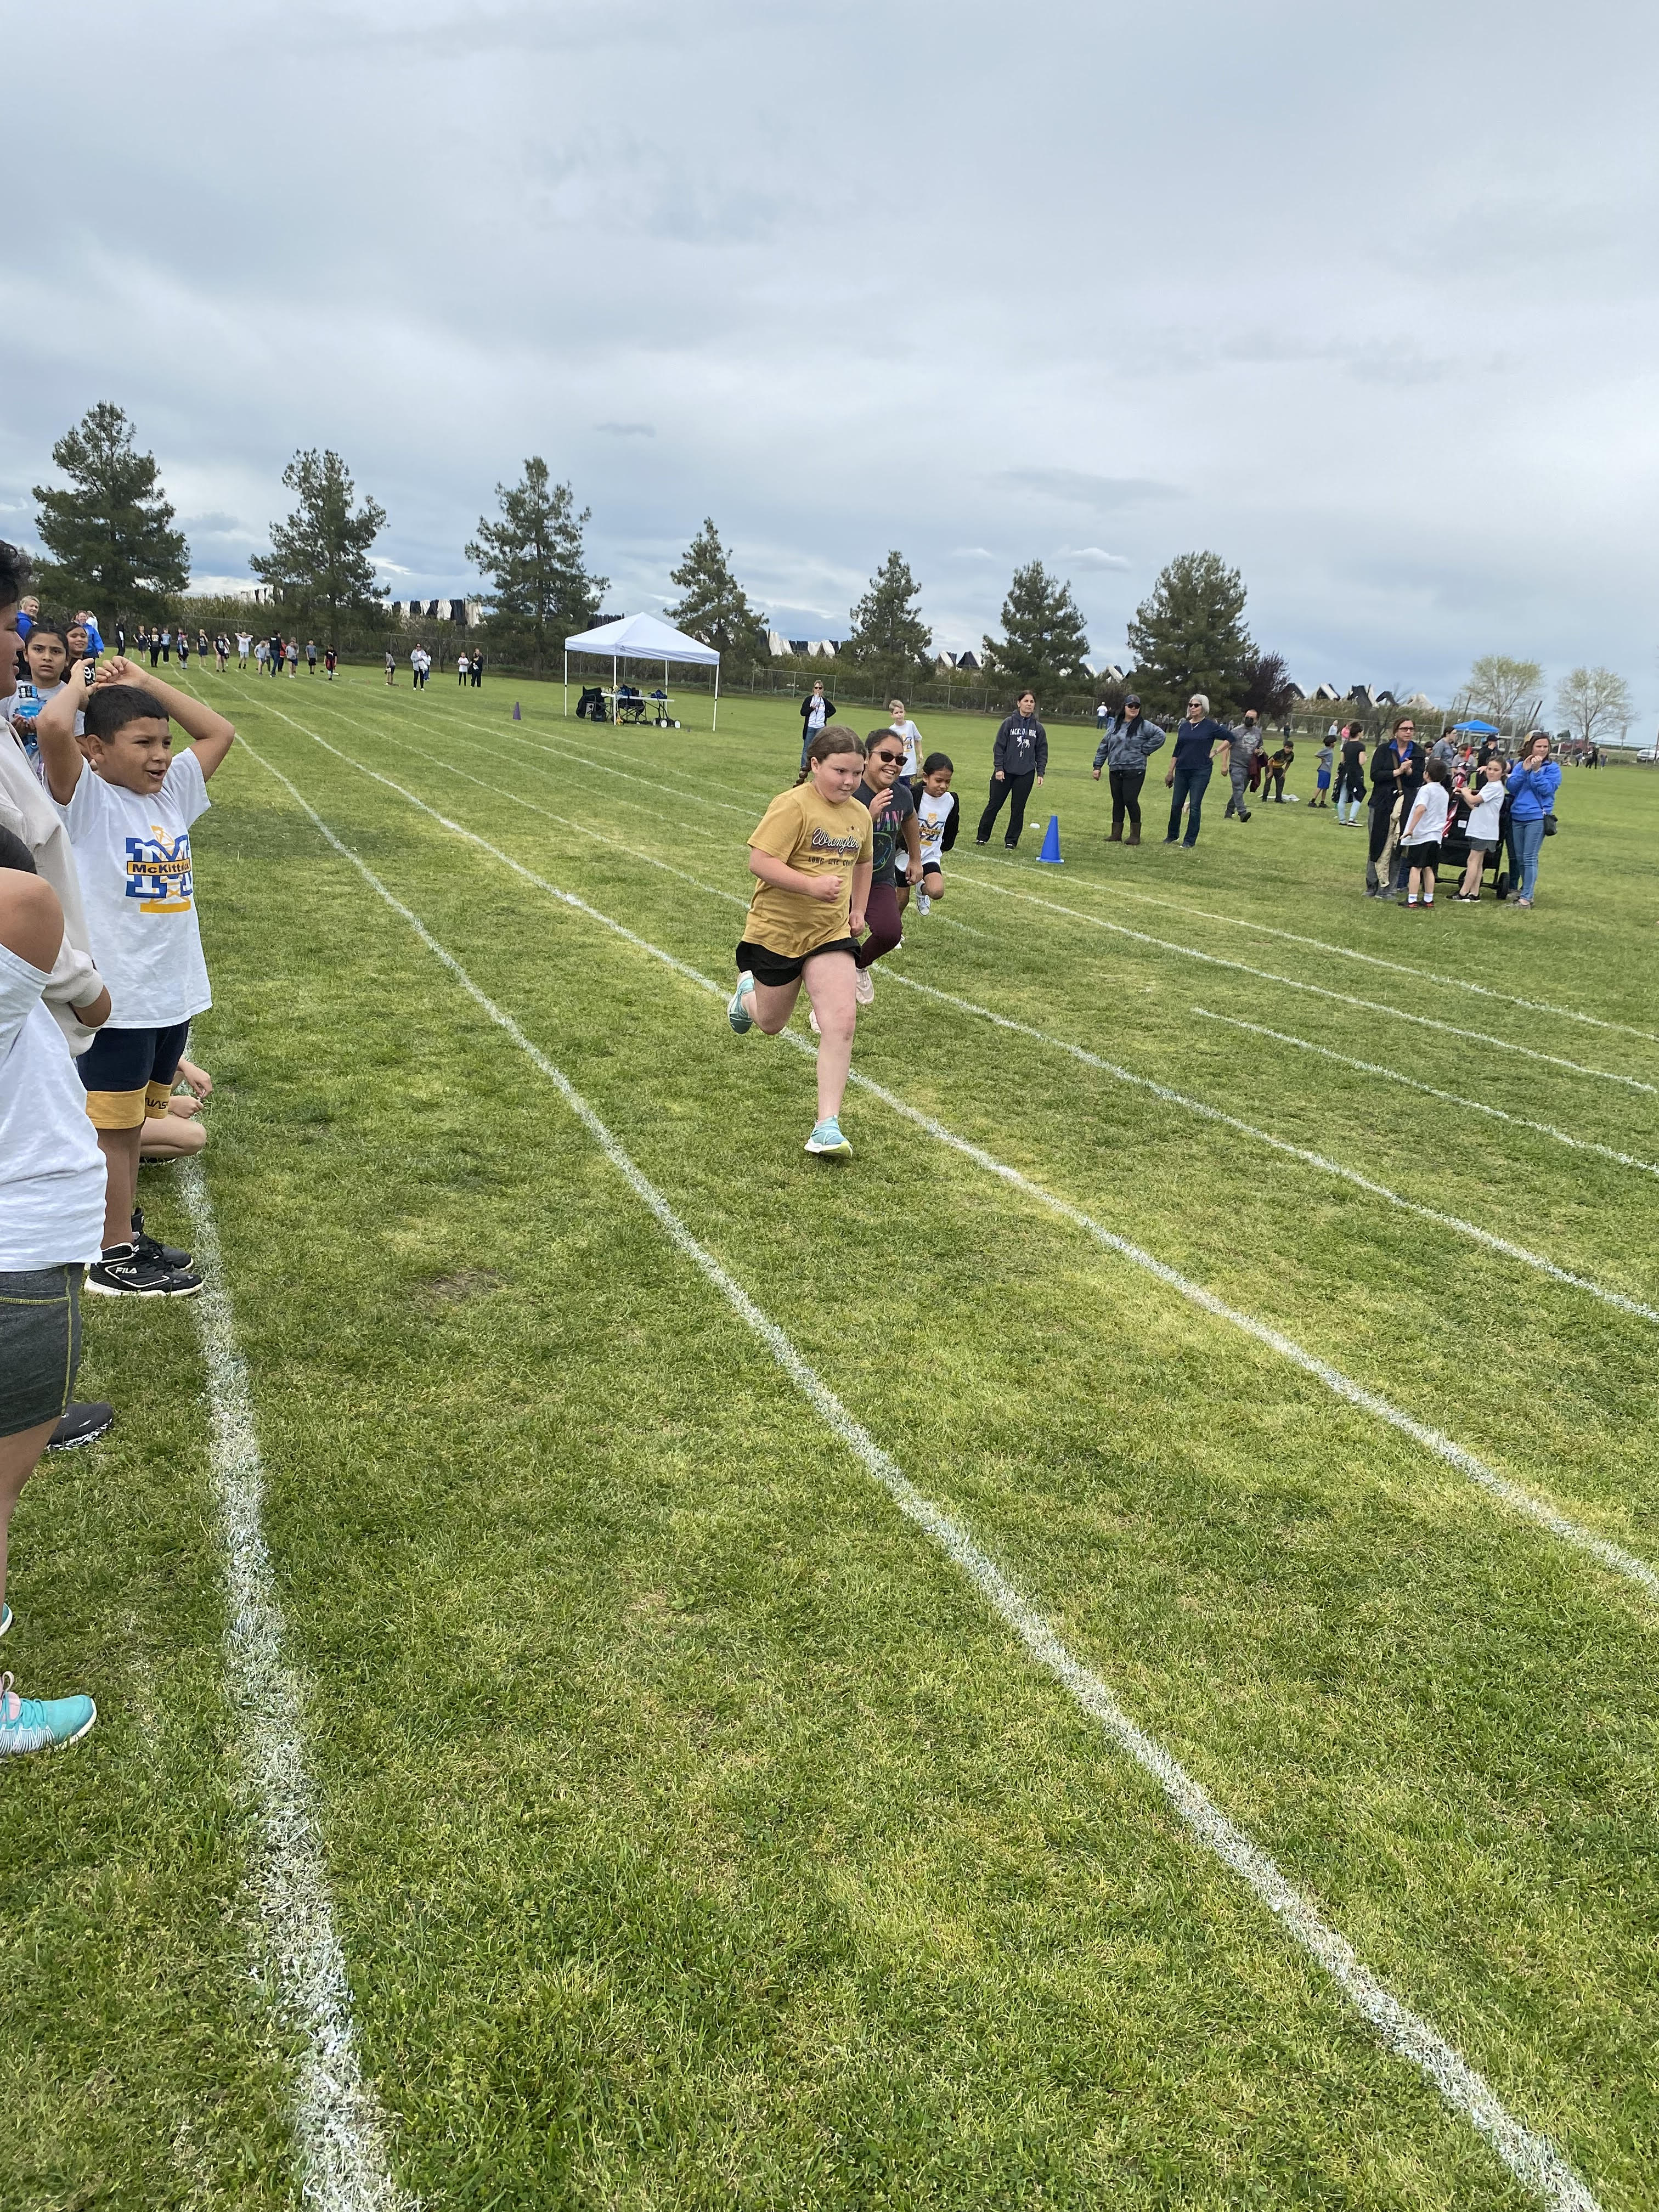 4th grade students running a race